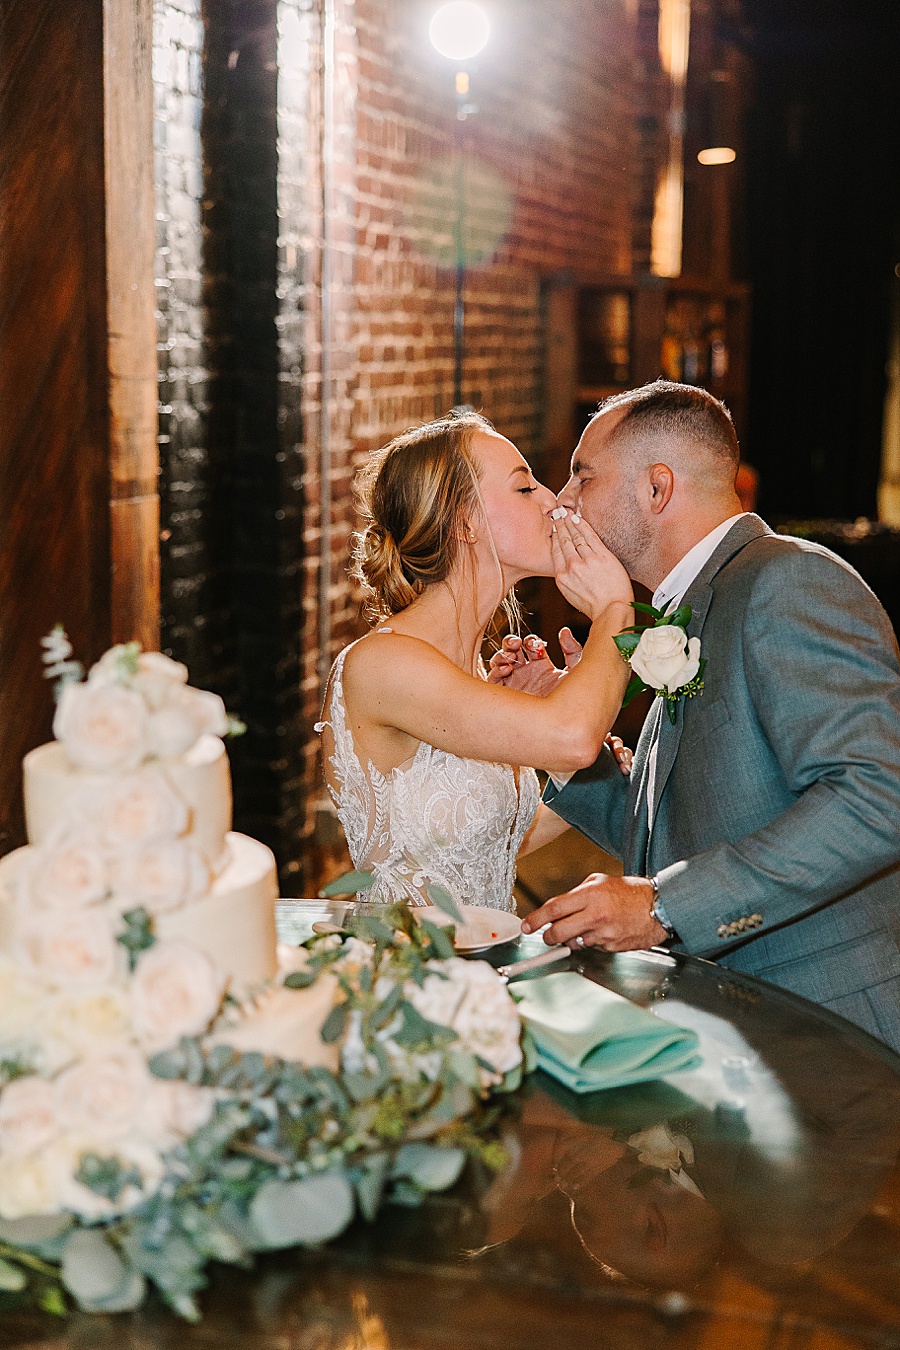 Bride & groom cutting cake at reception at Jackson Terminal events wedding in Knoxville TN by Mandy Hart Photo, Knoxville TN Wedding Photographer